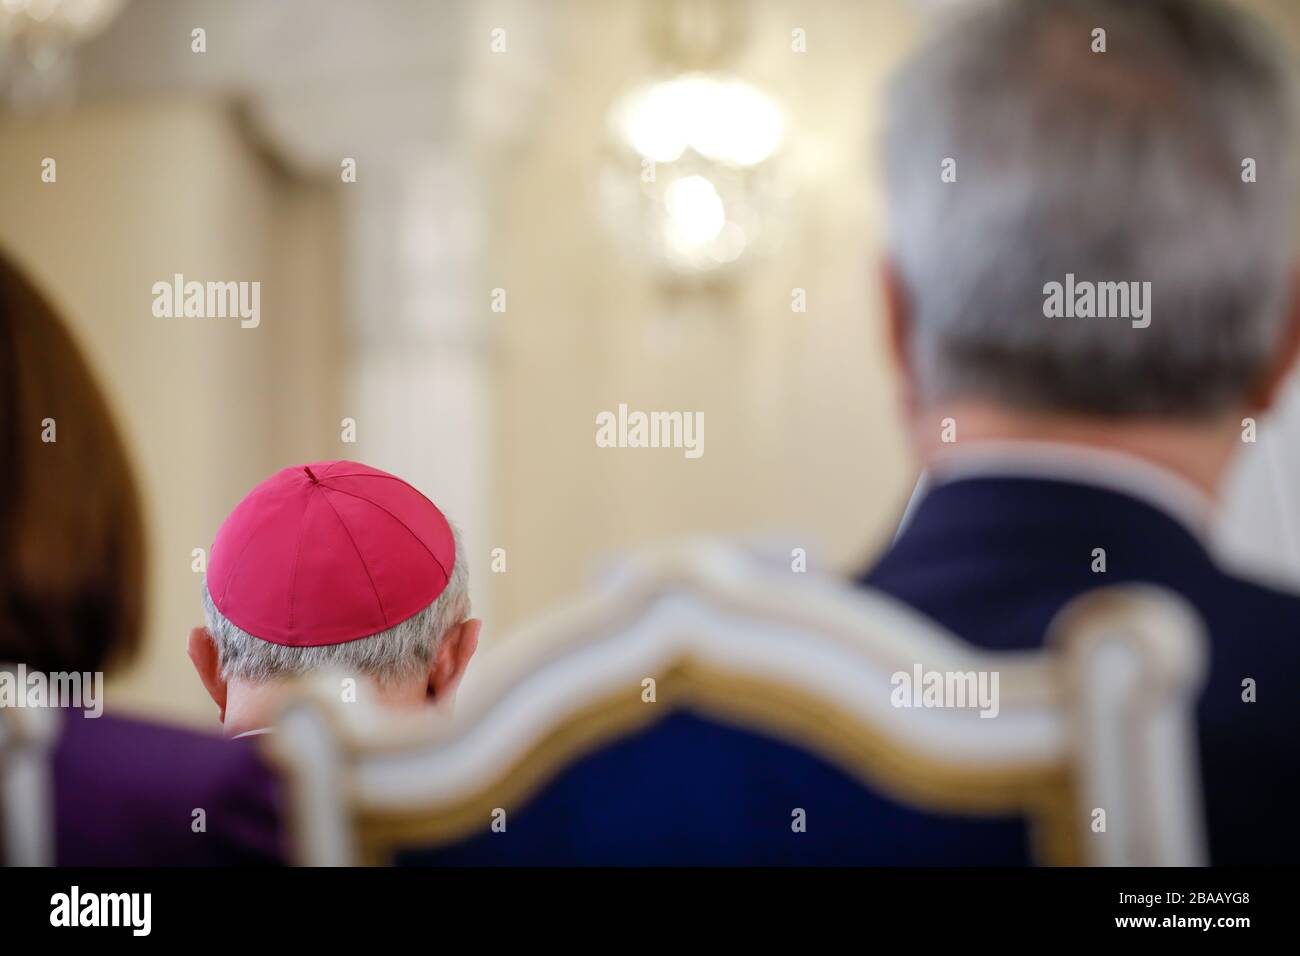 Details with a zucchetto - a small, hemispherical, form-fitting ecclesiastical skullcap worn by clerics of various Catholic churches on the head of a Stock Photo